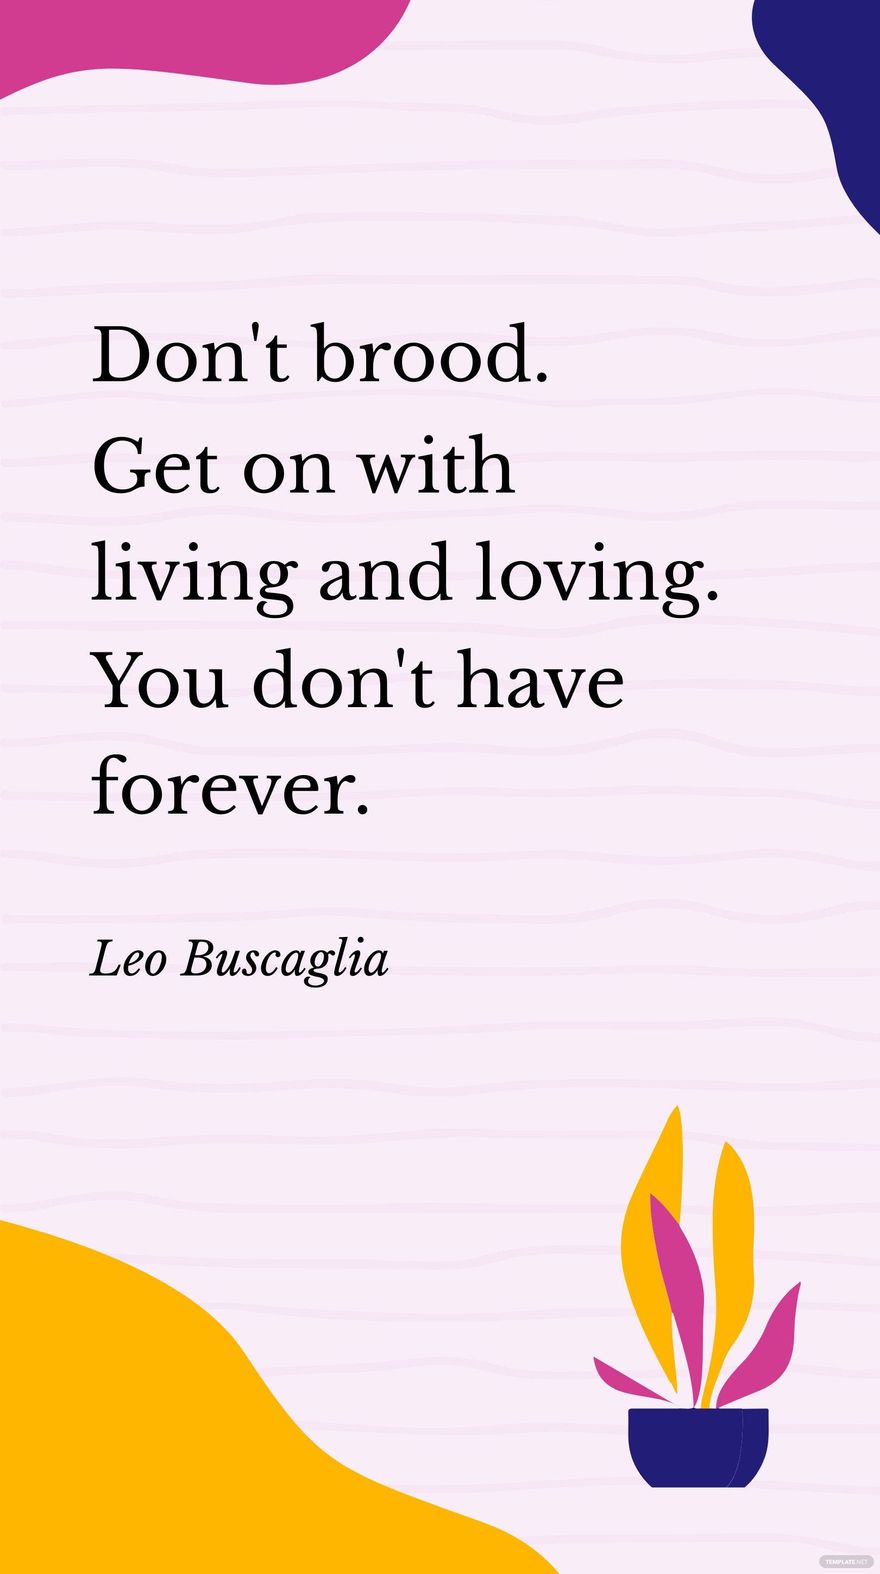 Leo Buscaglia - Don't brood. Get on with living and loving. You don't have forever.